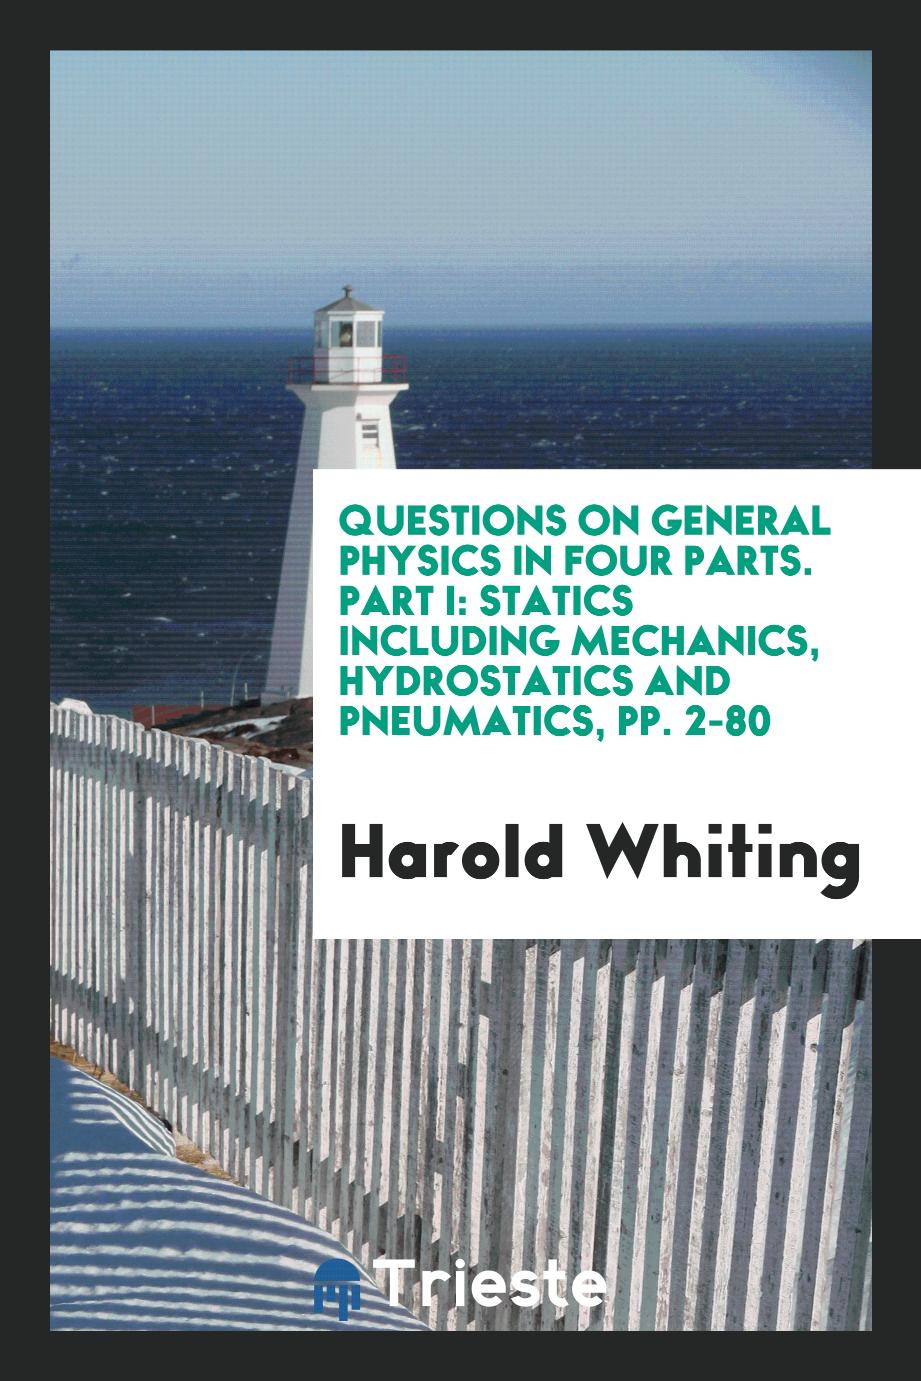 Questions on General Physics in Four Parts. Part I: Statics Including Mechanics, Hydrostatics and Pneumatics, pp. 2-80